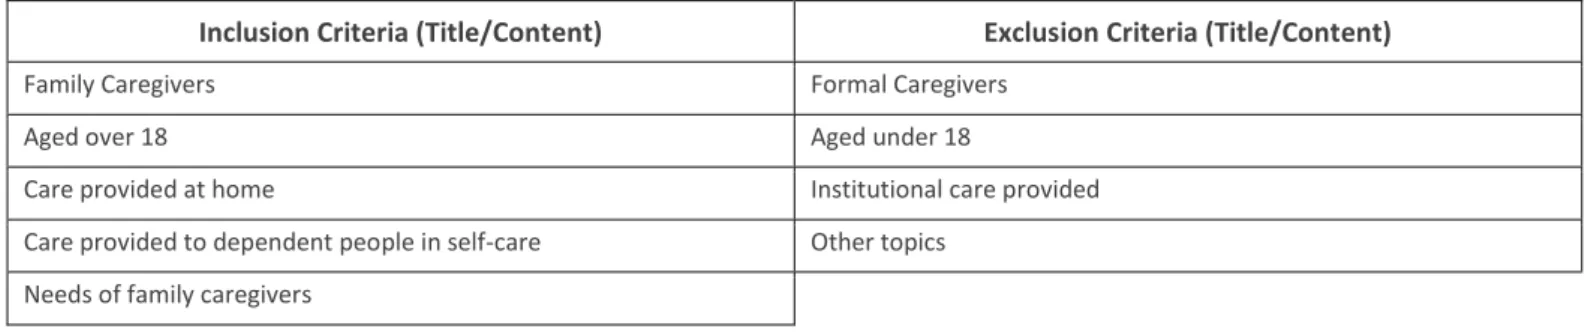 Table 1 - Inclusion and exclusion criteria from the integrative literature review